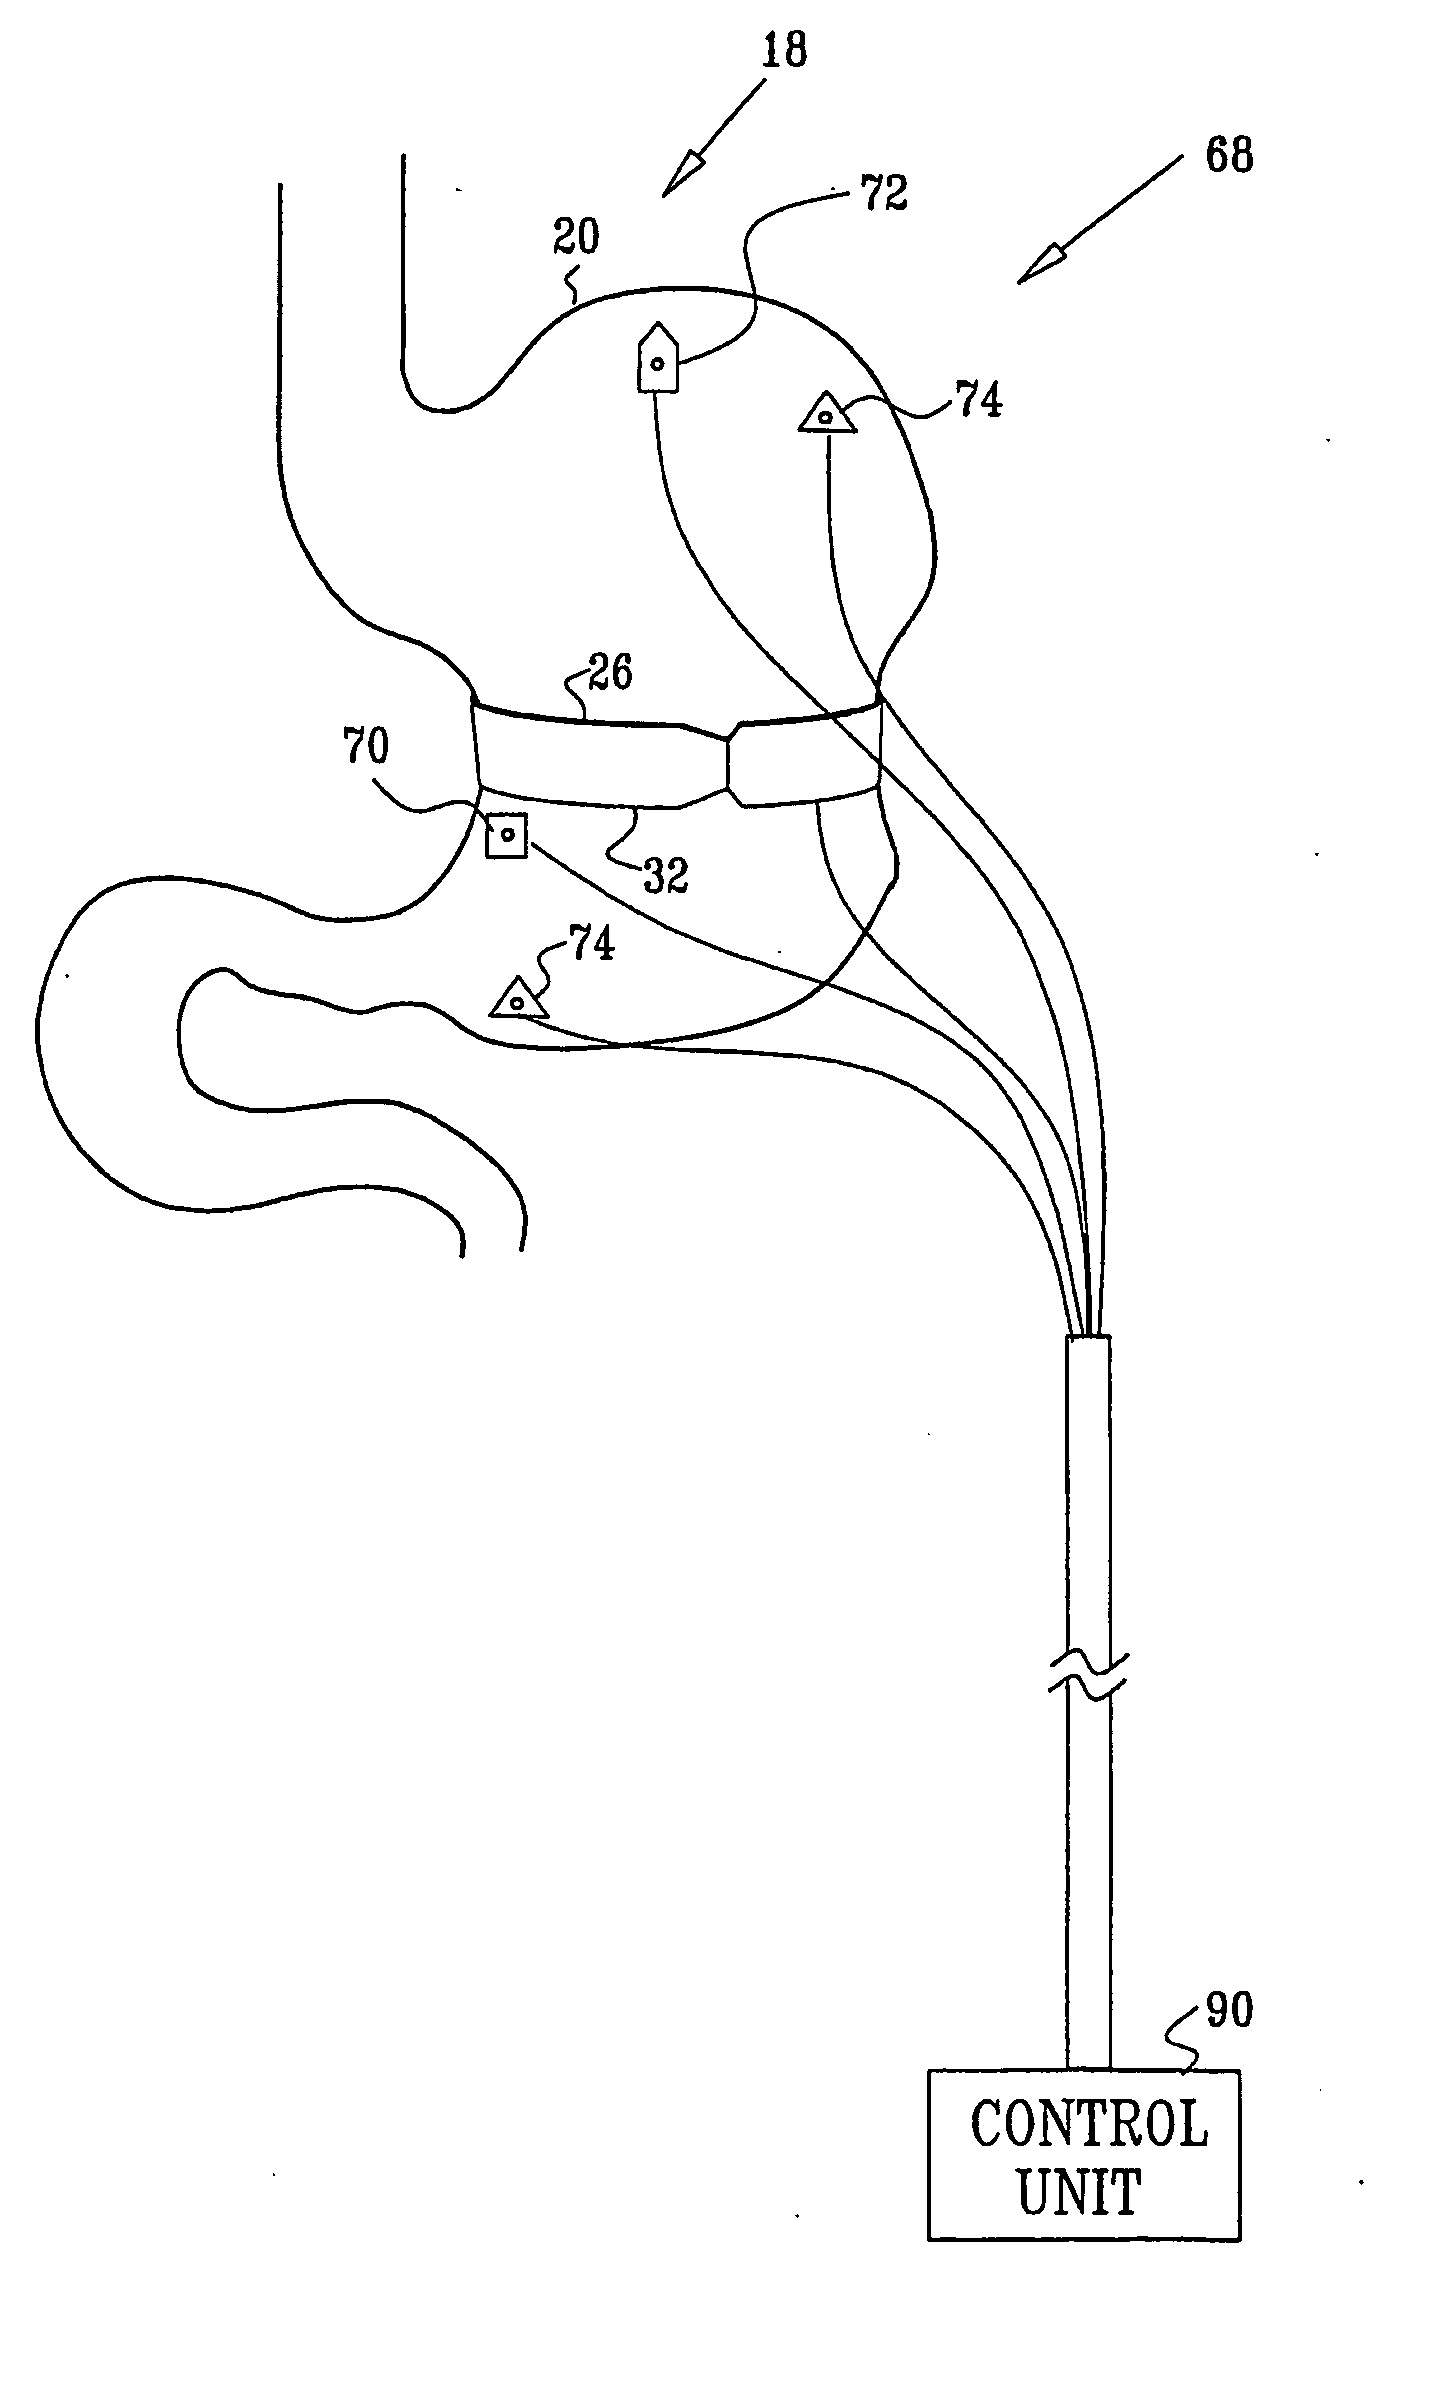 Gastrointestinal methods and apparatus for use in treating disorders and controlling blood sugar